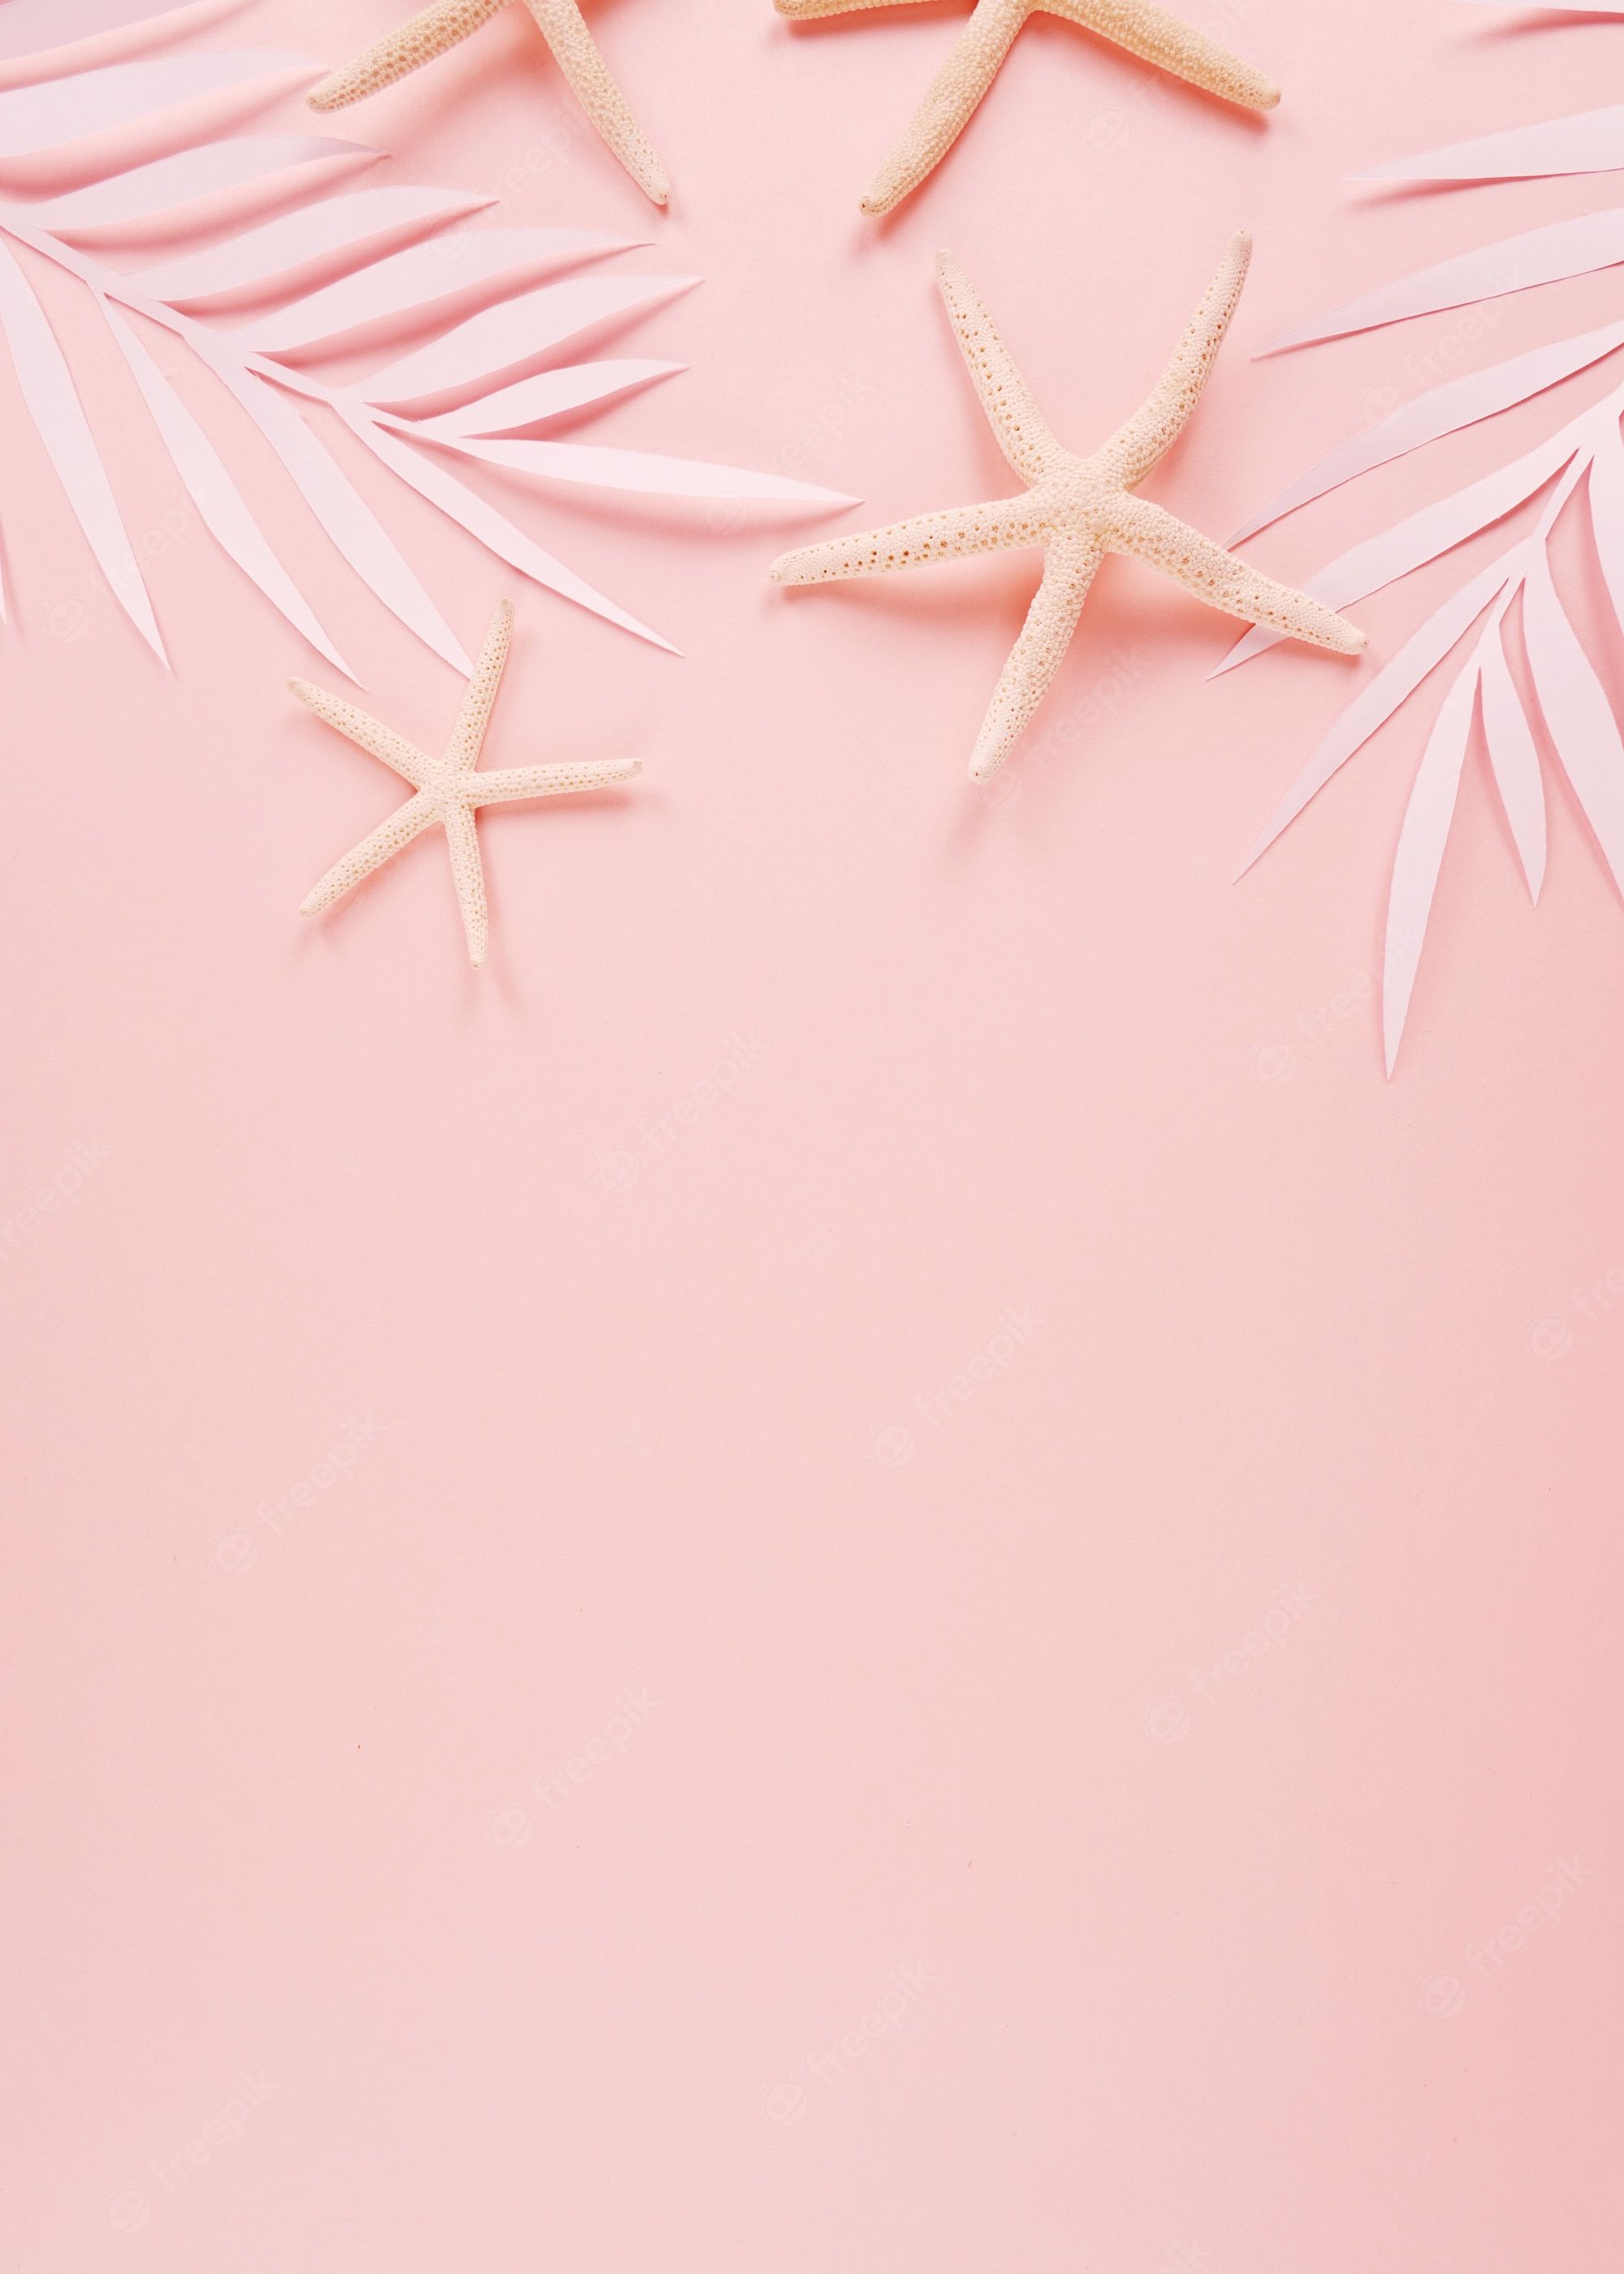 A flat lay of starfish and palm leaves on a pink background - Starfish